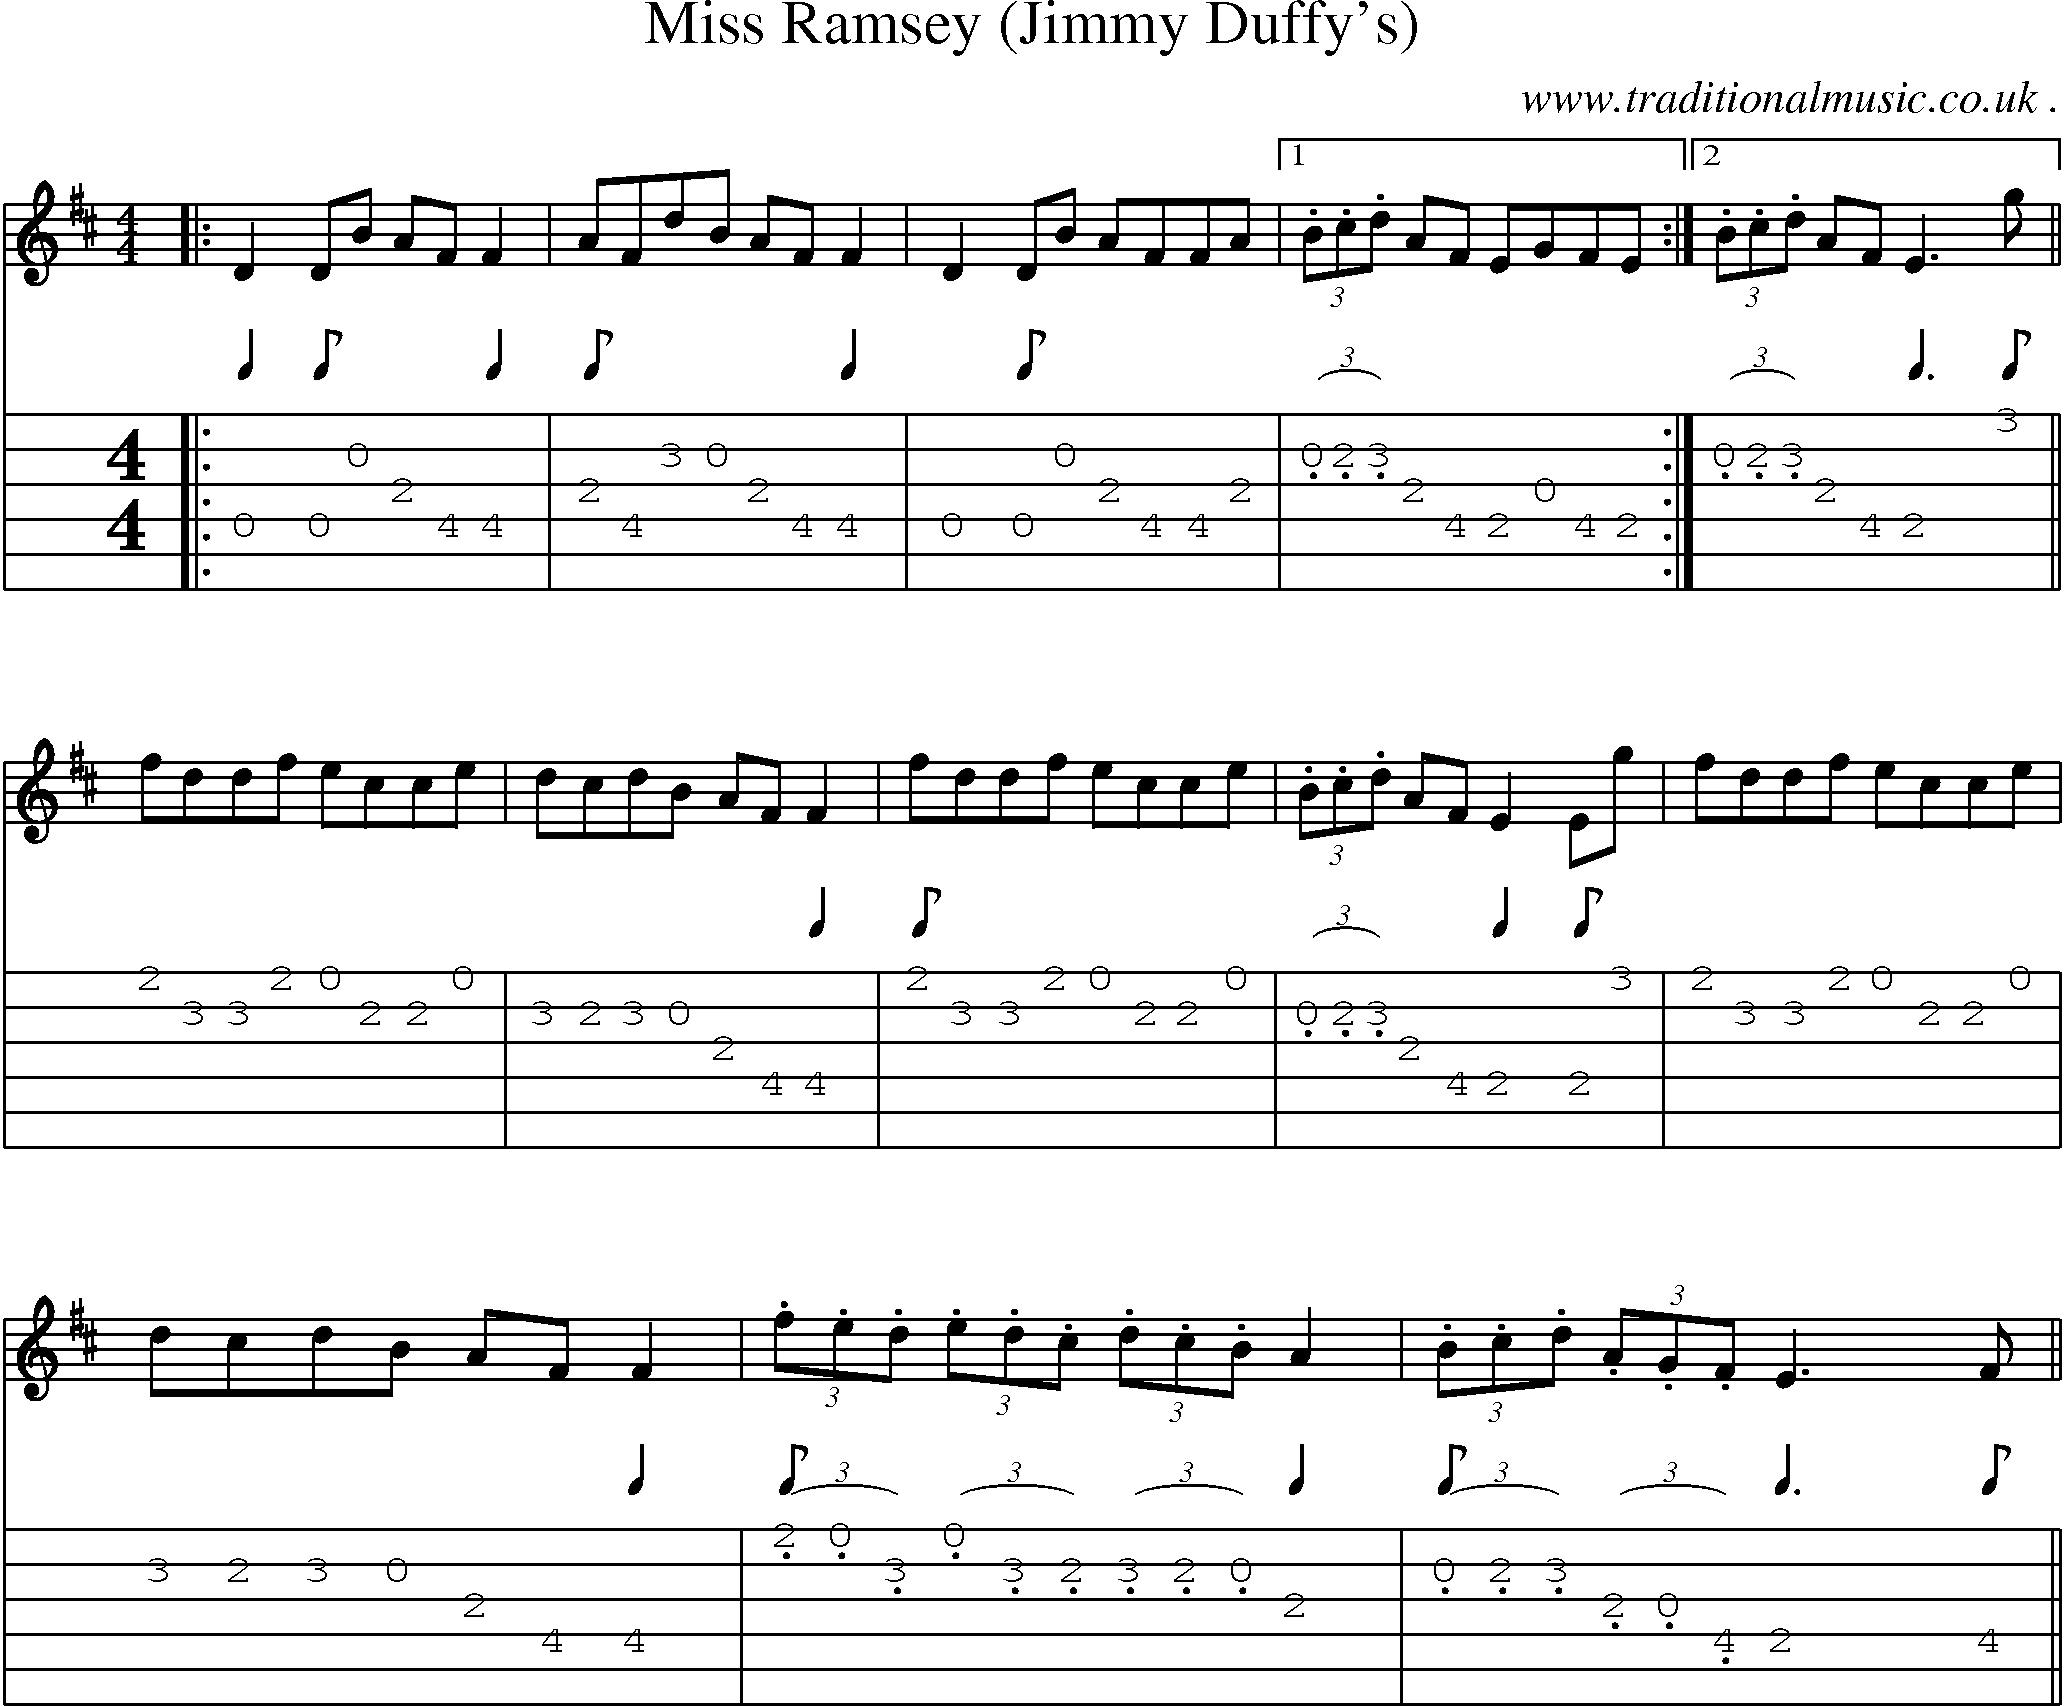 Sheet-Music and Guitar Tabs for Miss Ramsey (jimmy Duffys)